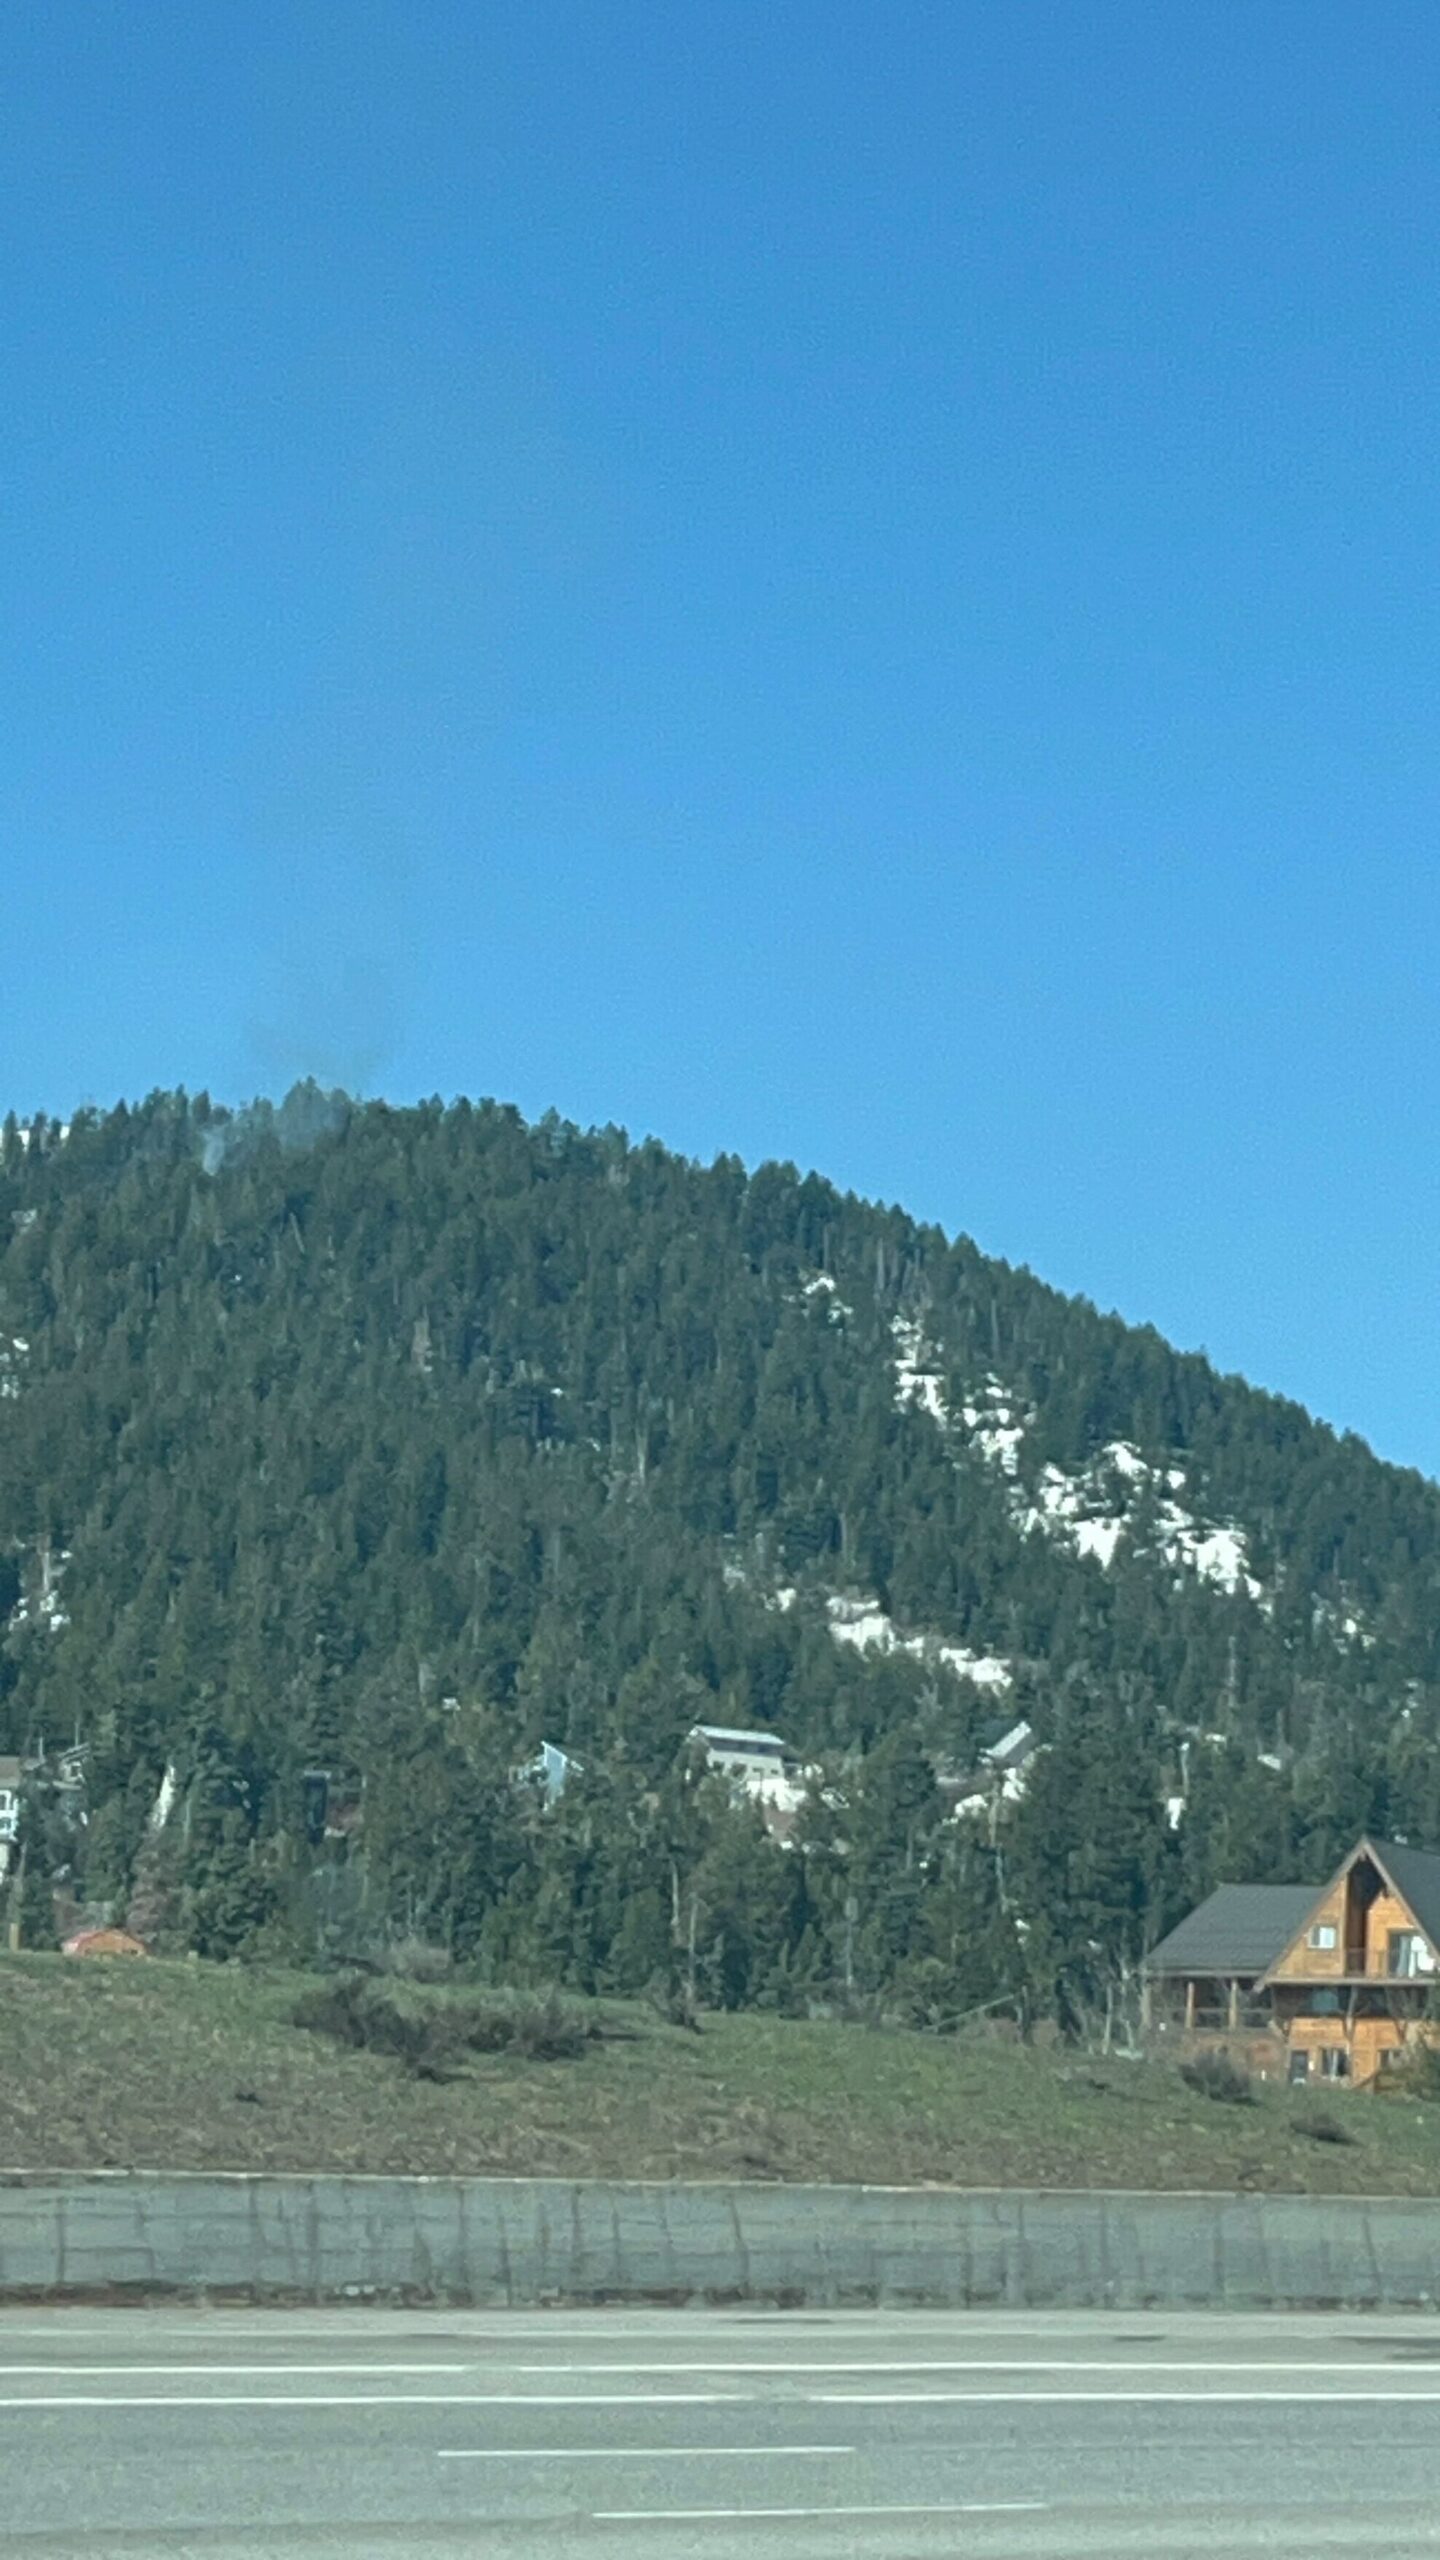 Smoke coming from the prescribed burn at Summit Park is visible from I-80.